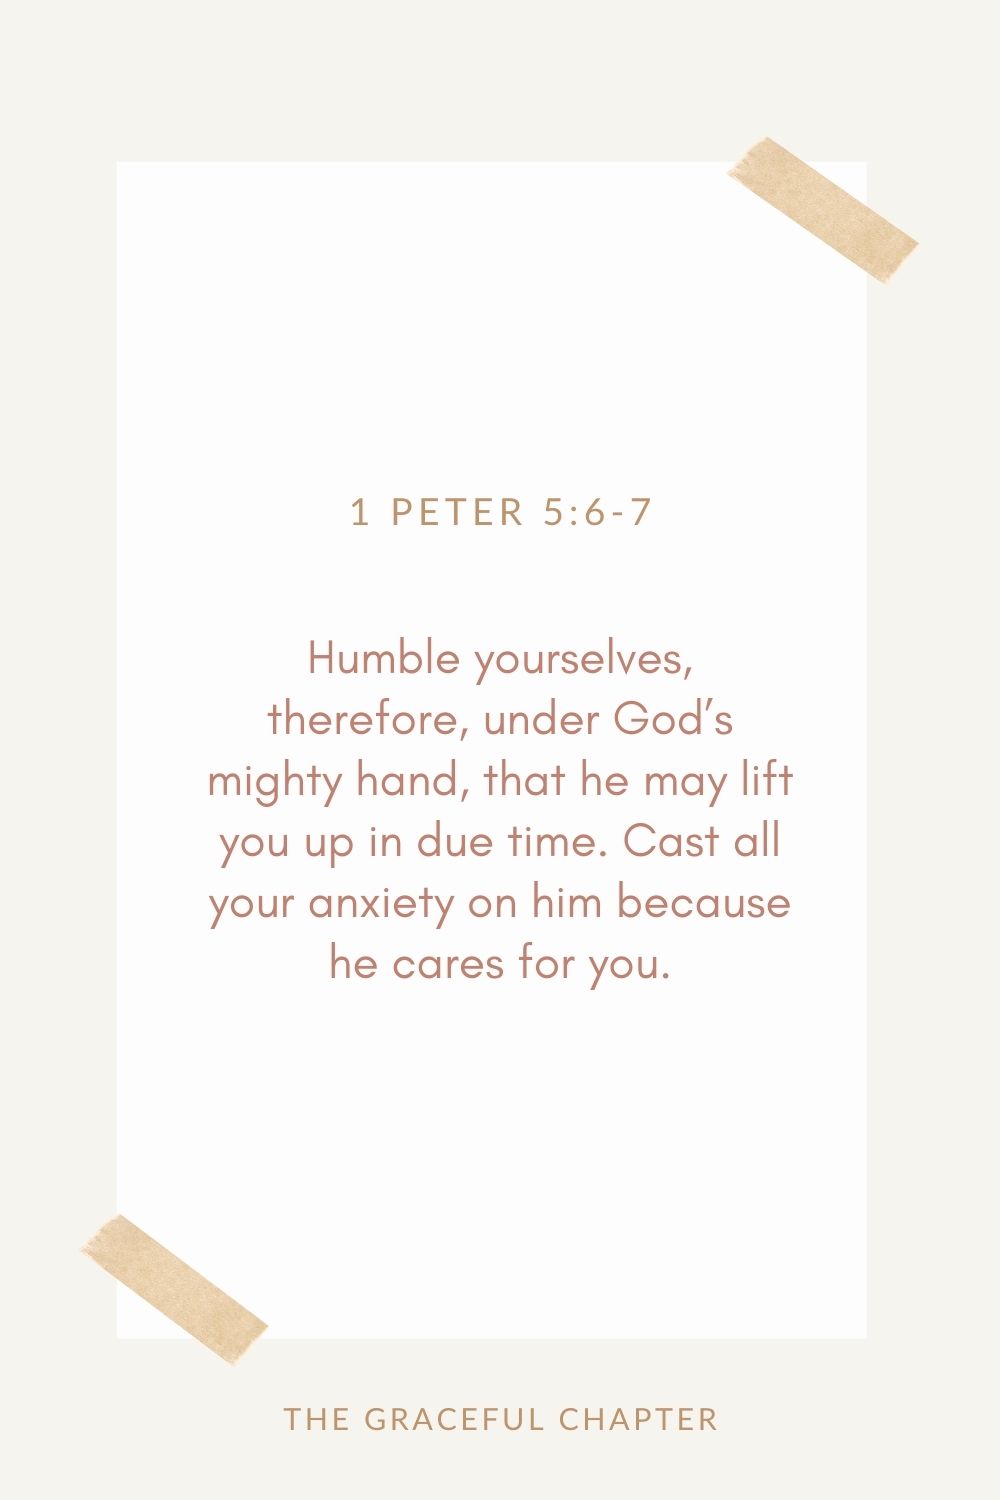 Humble yourselves, therefore, under God’s mighty hand, that he may lift you up in due time. Cast all your anxiety on him because he cares for you. 1 Peter 5:6-7